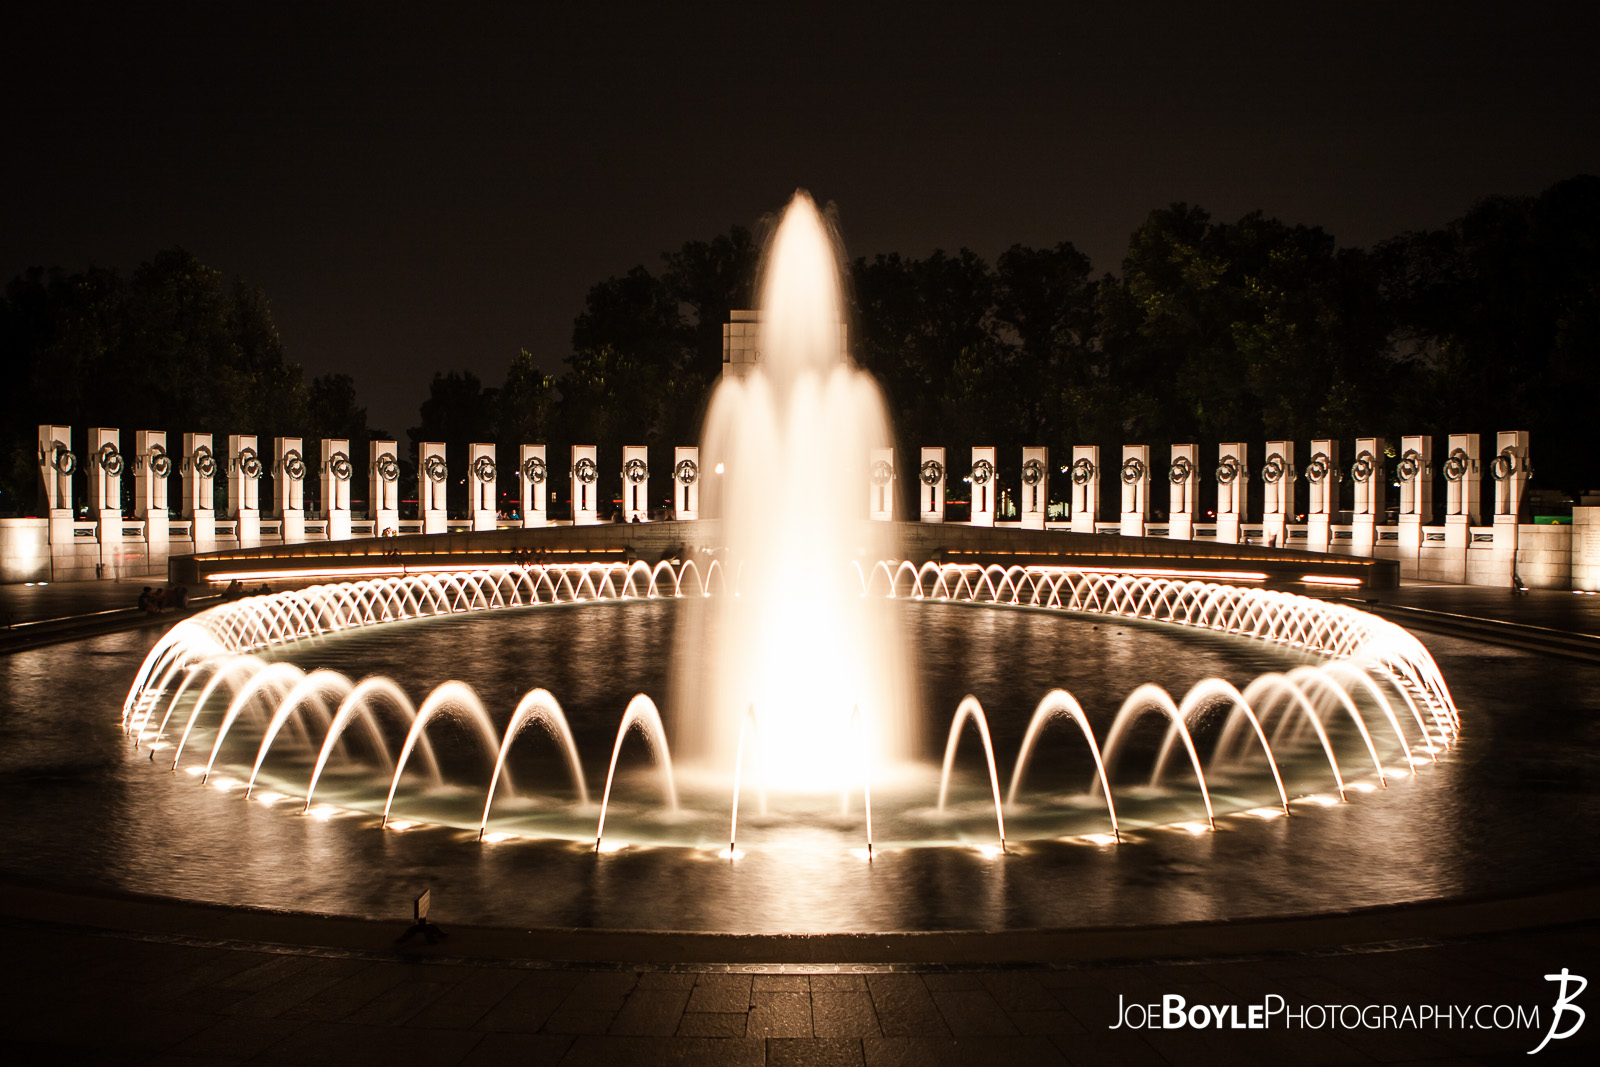  While I was in Washington, DC I was able to take some great night images of a few of the iconic landmarks that make up this city such as this image: The World War II Memorial! I love taking long exposure, night shots of moving water and fountains! 